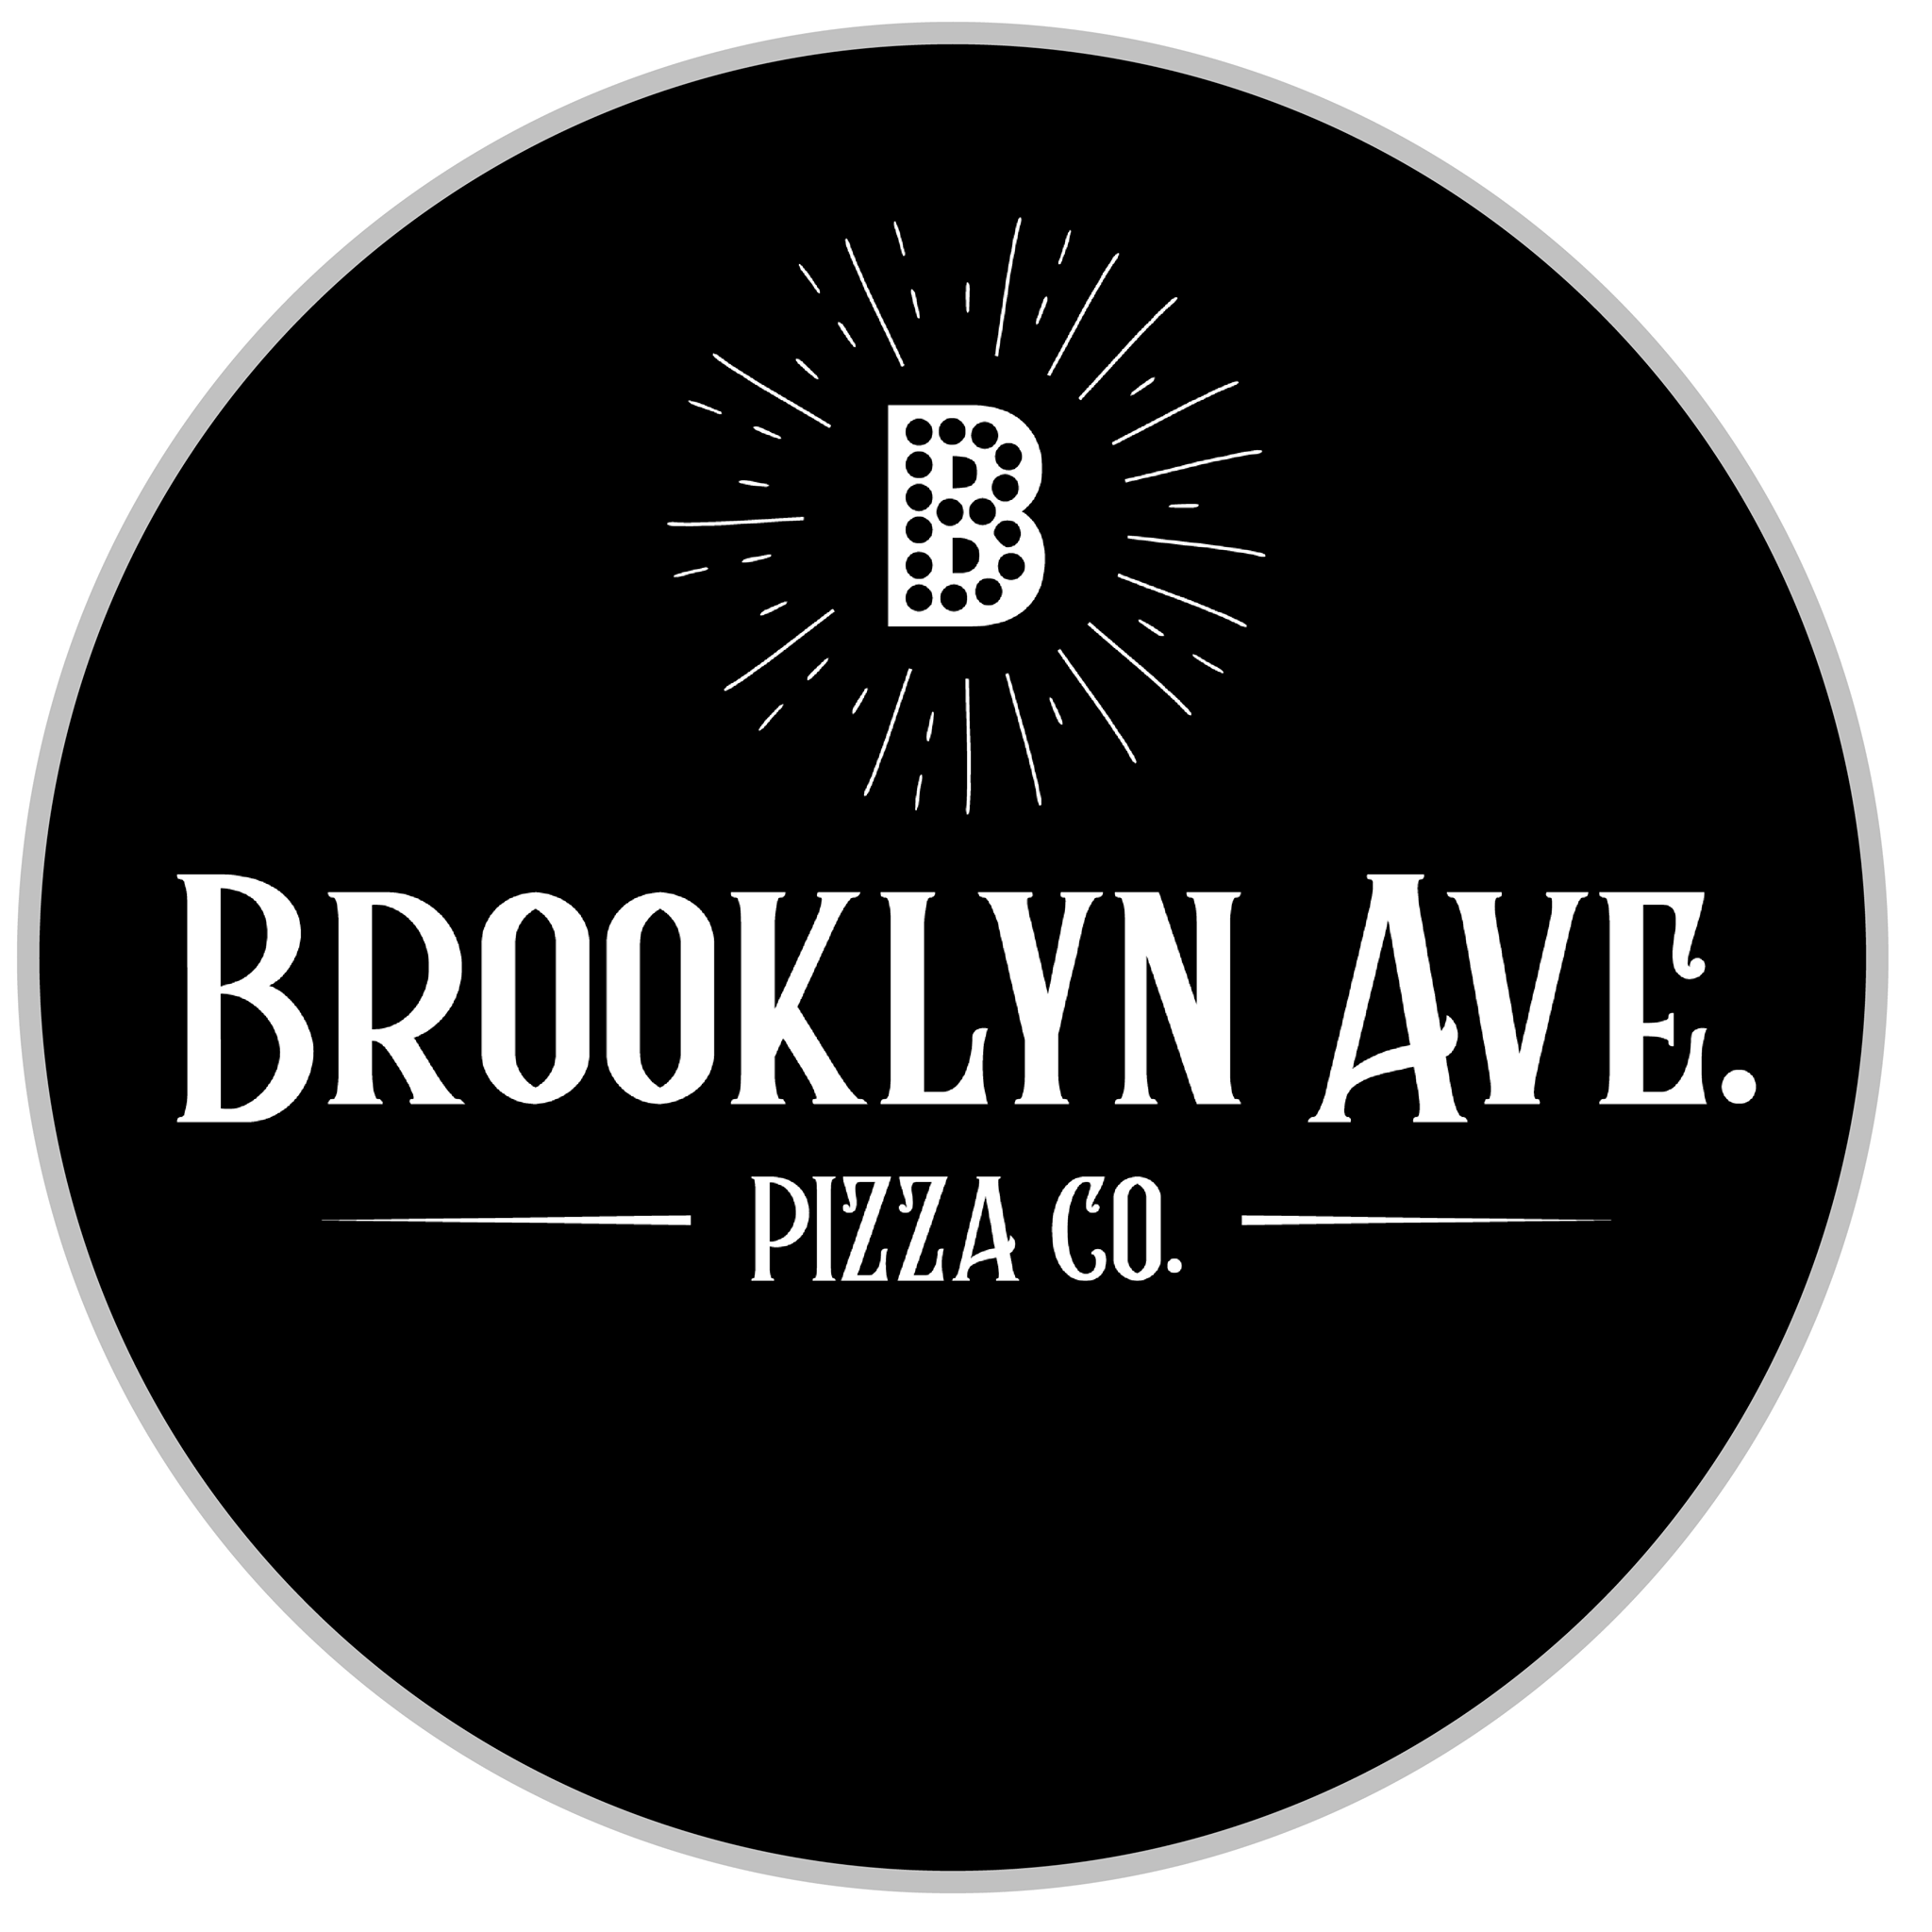 Brooklyn Ave Pizza Co.